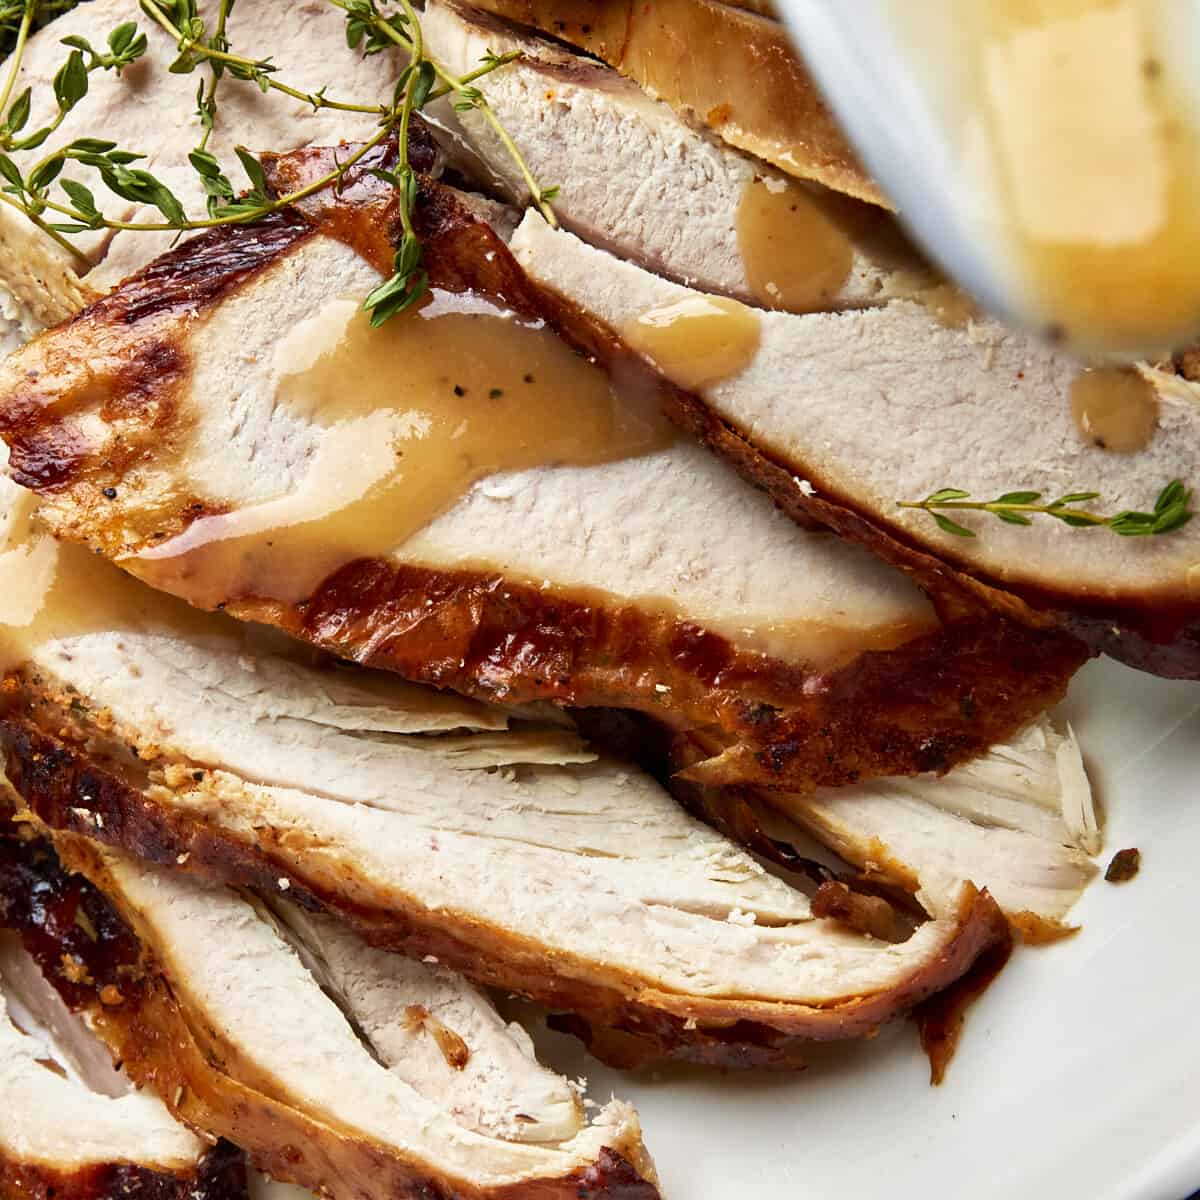 Sliced turkey with gravy drizzled on top.